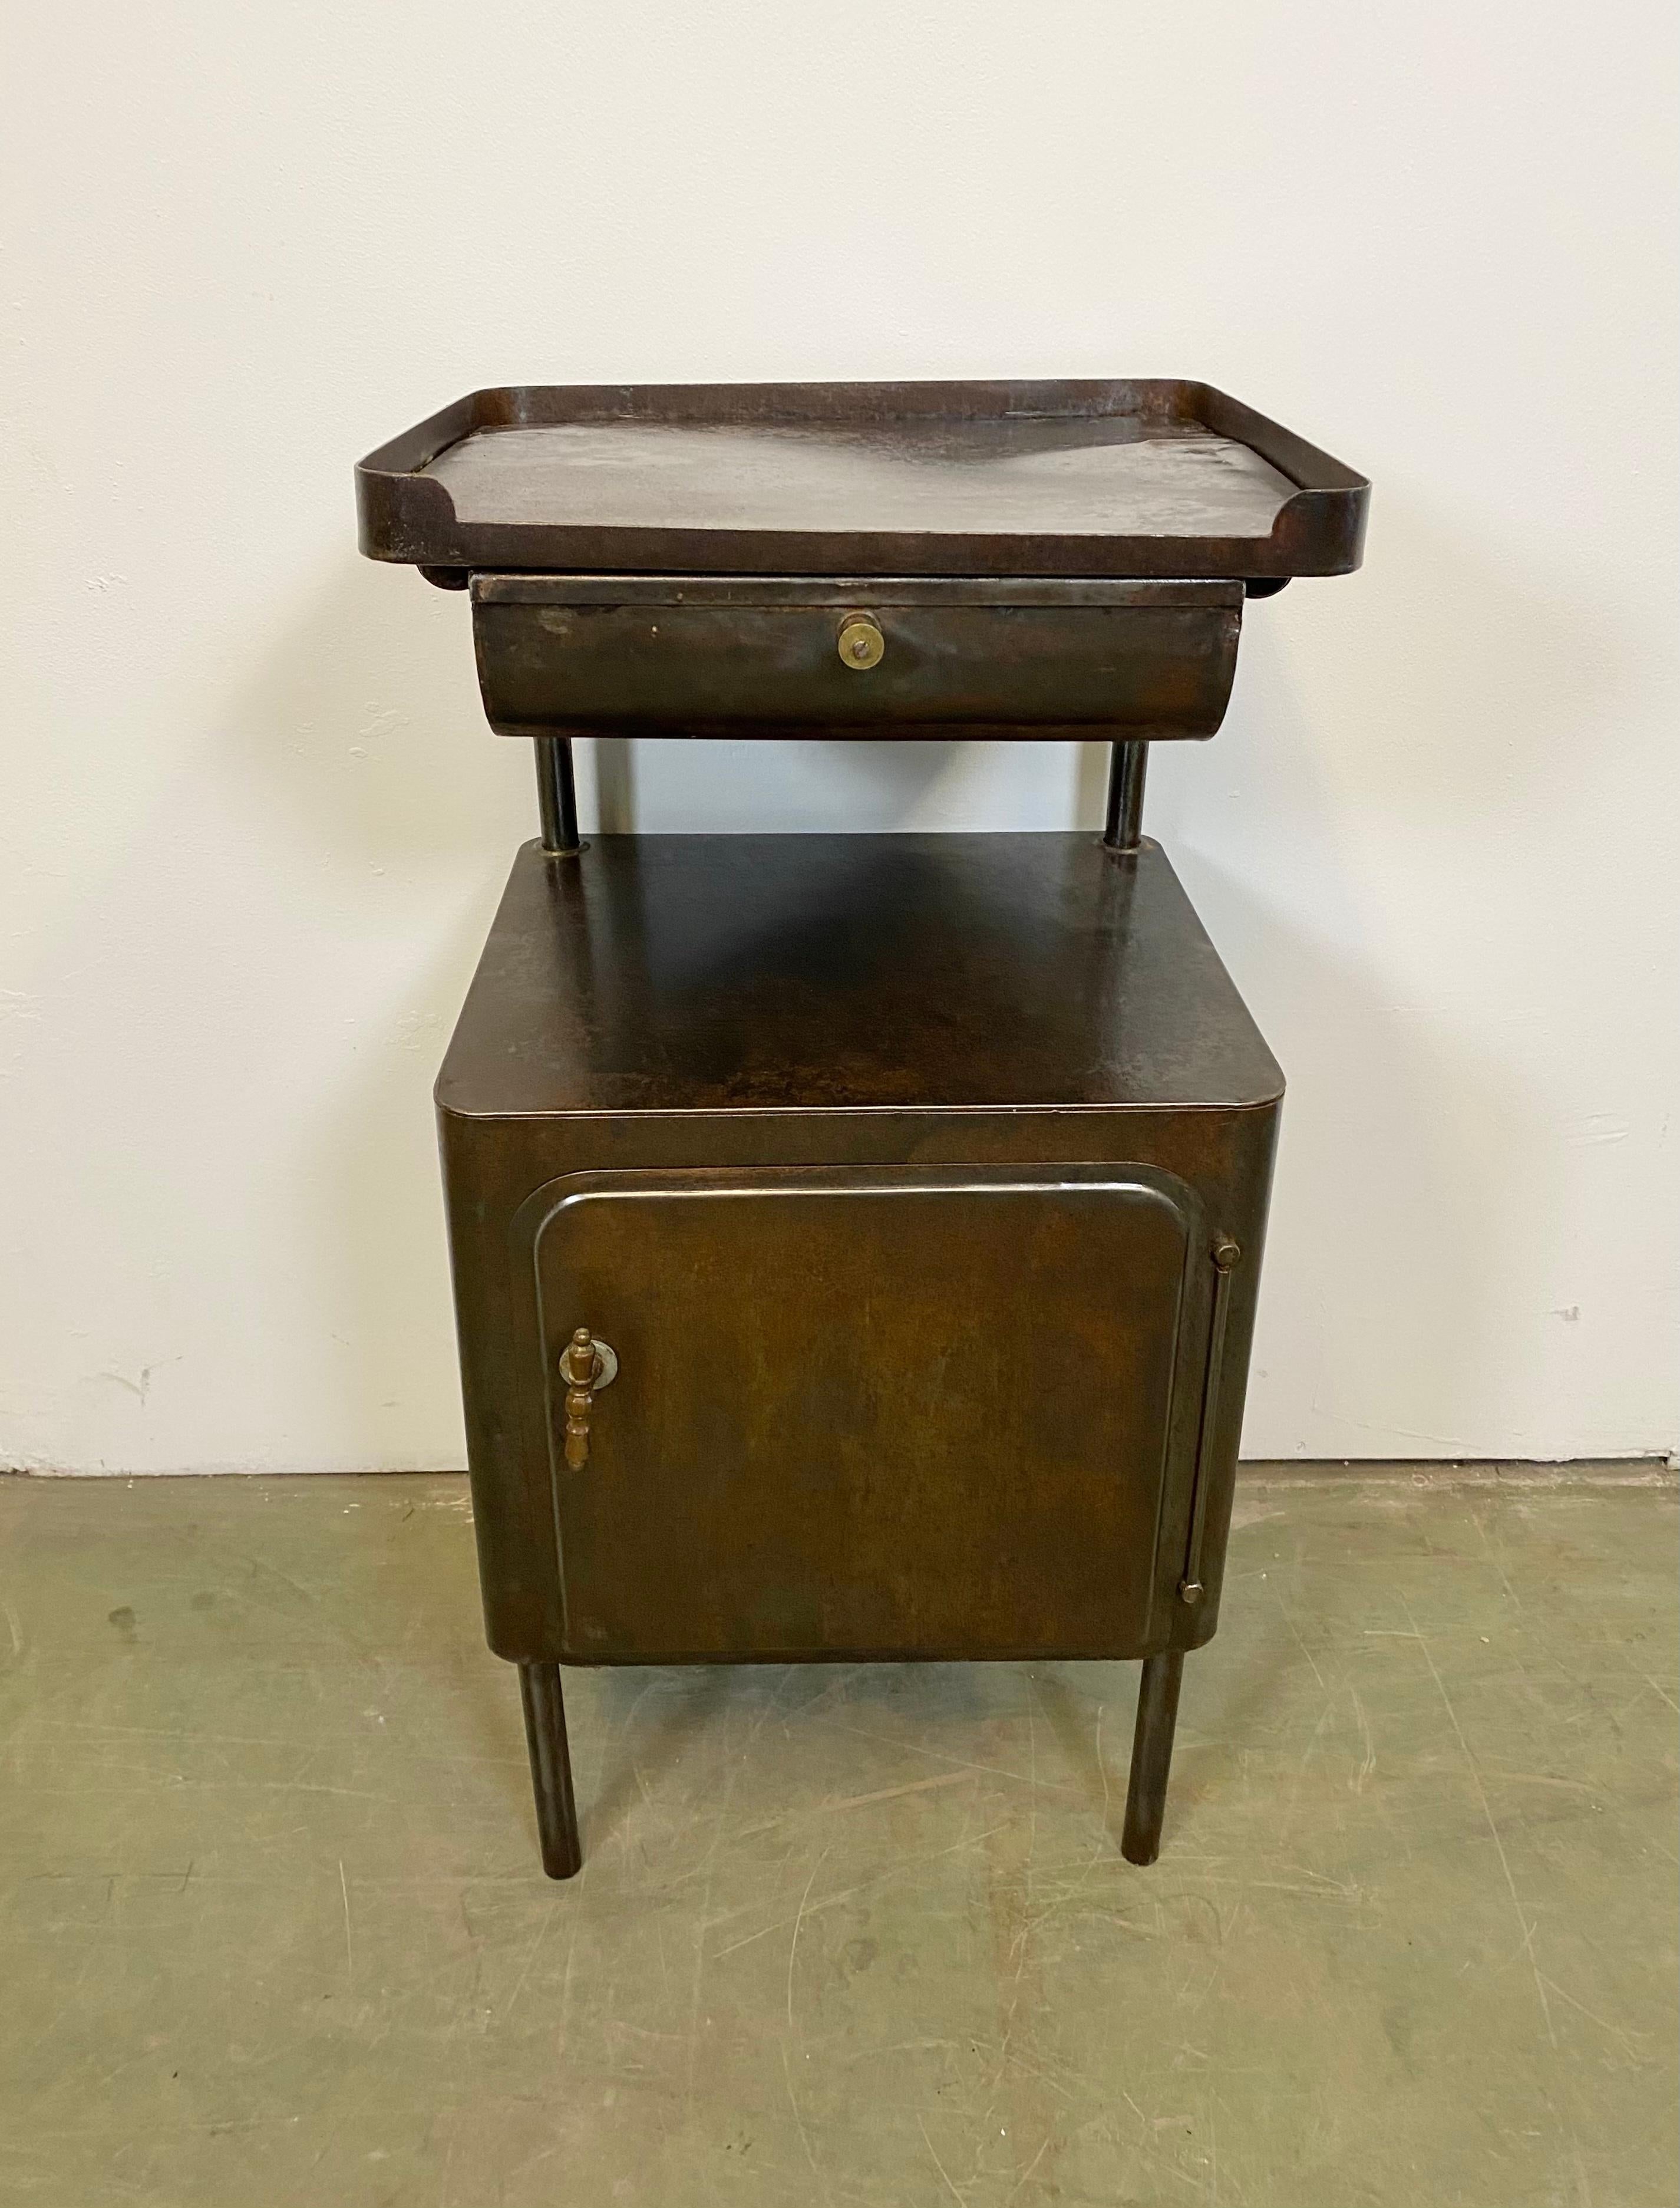 - Industrial, brushed, metal, 2-tier, hospital nightstand cabinet.
- Made during the 1950s.
- It features a storage on the bottom and a drawer on top.
- Brass buttons
- The weight of the nightstand is 11 kg.